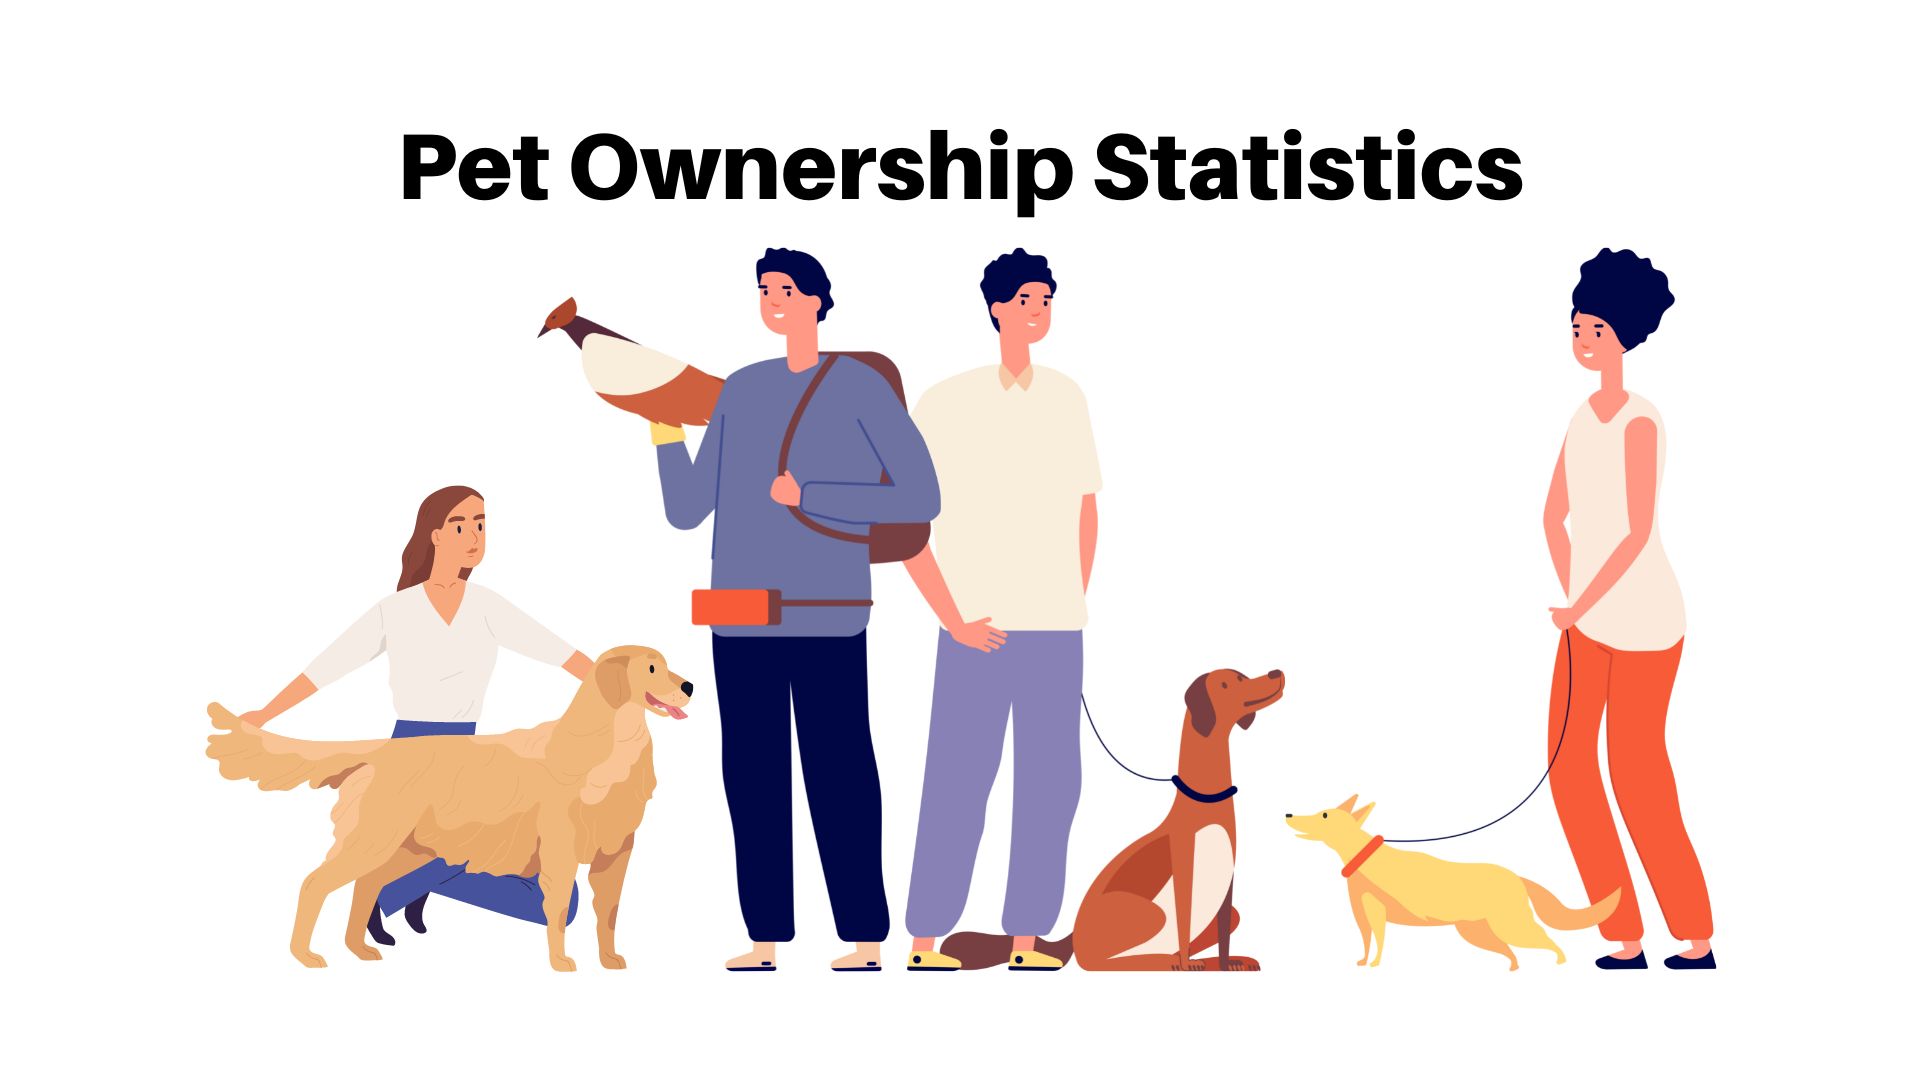 Pet Ownership Statistics – Types Of Pets, By Region, Country and Demographics